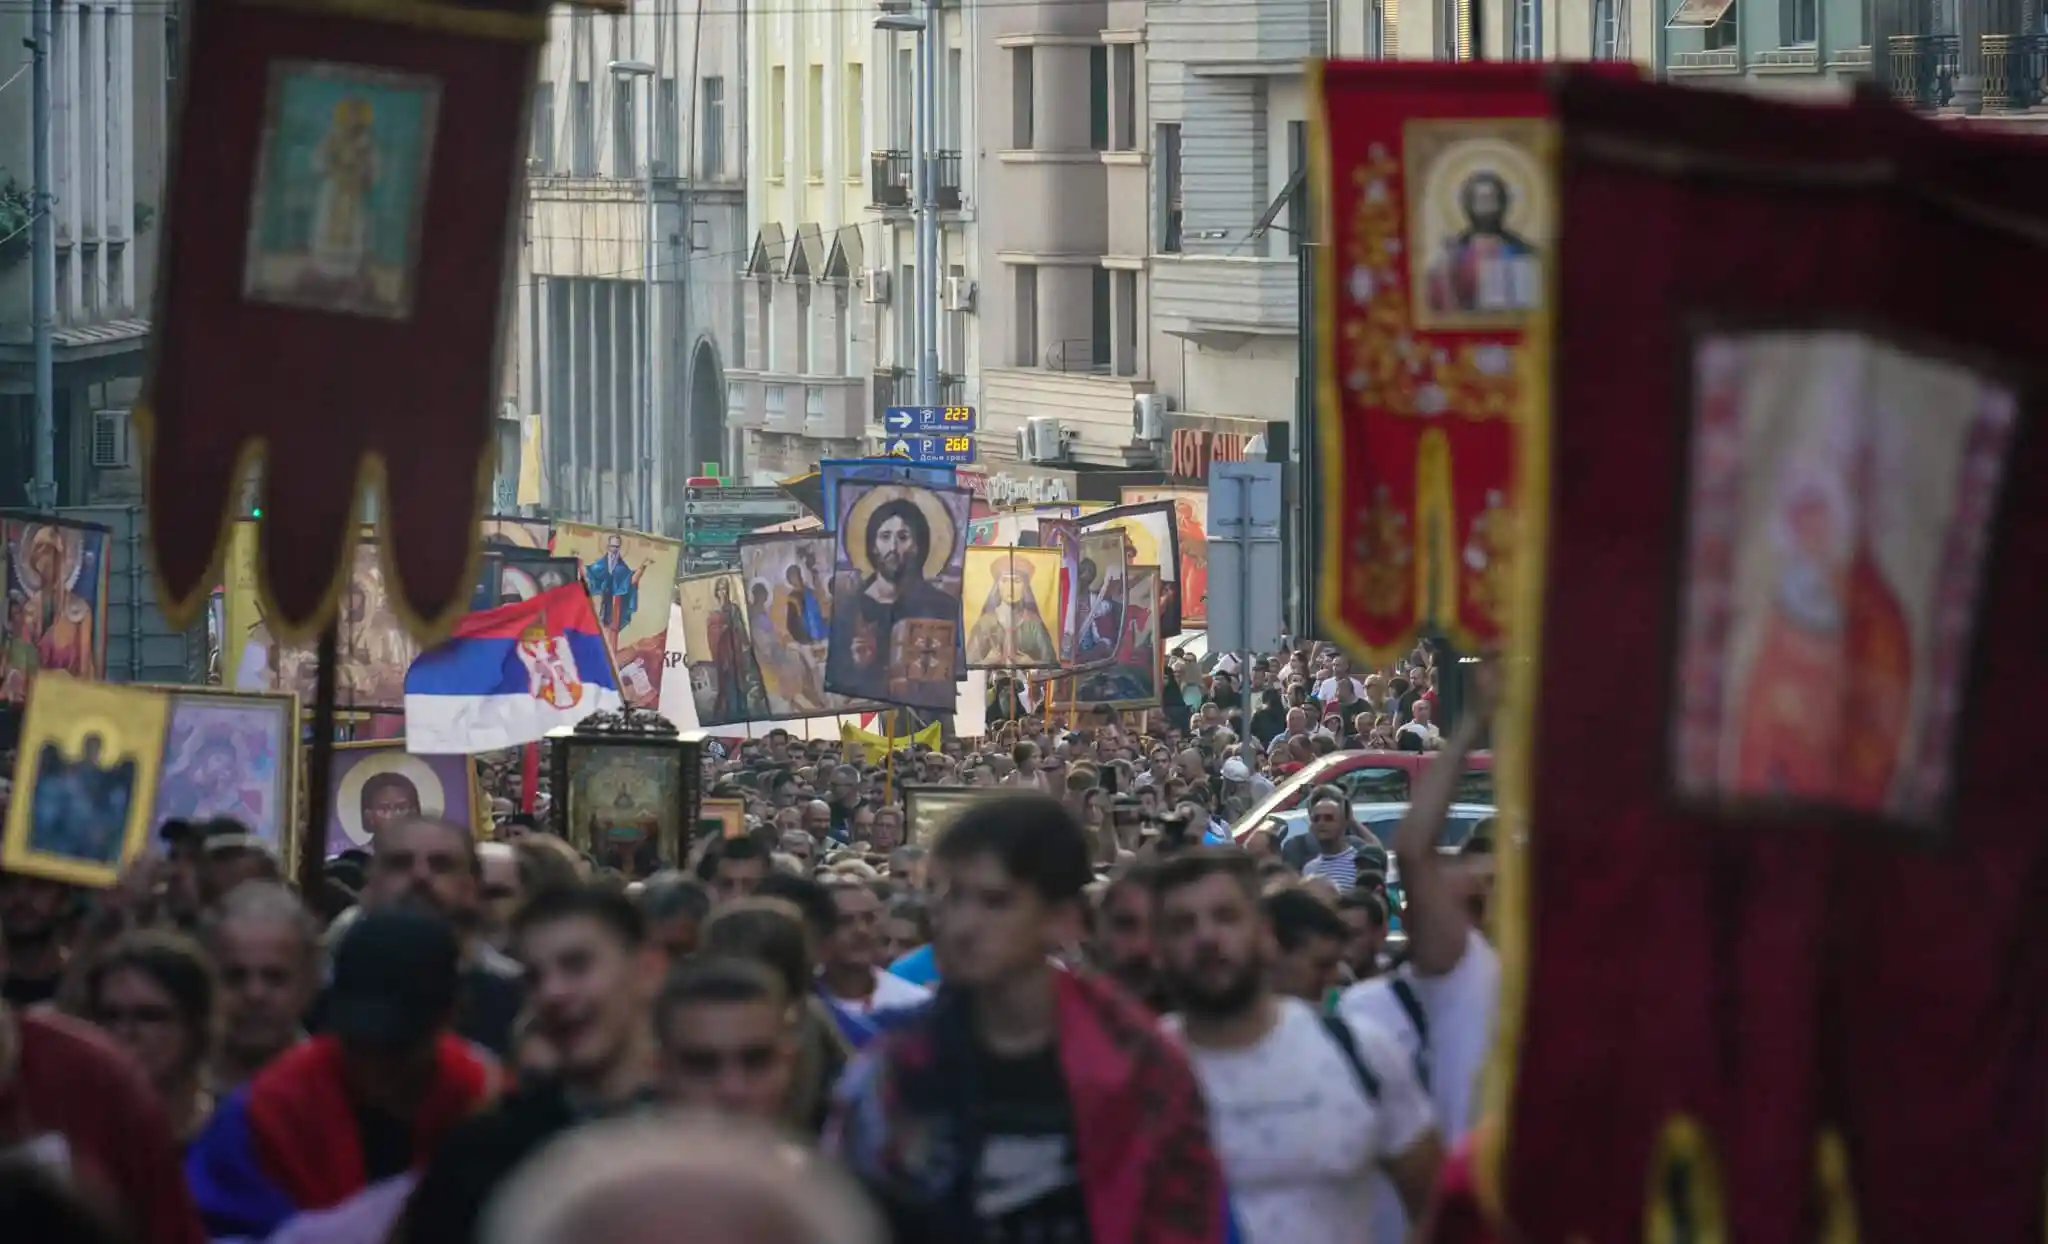 Thousands of believers marched against the holding of the international LGBT event Euro Pride, which should take place next month in the Serbian capital.